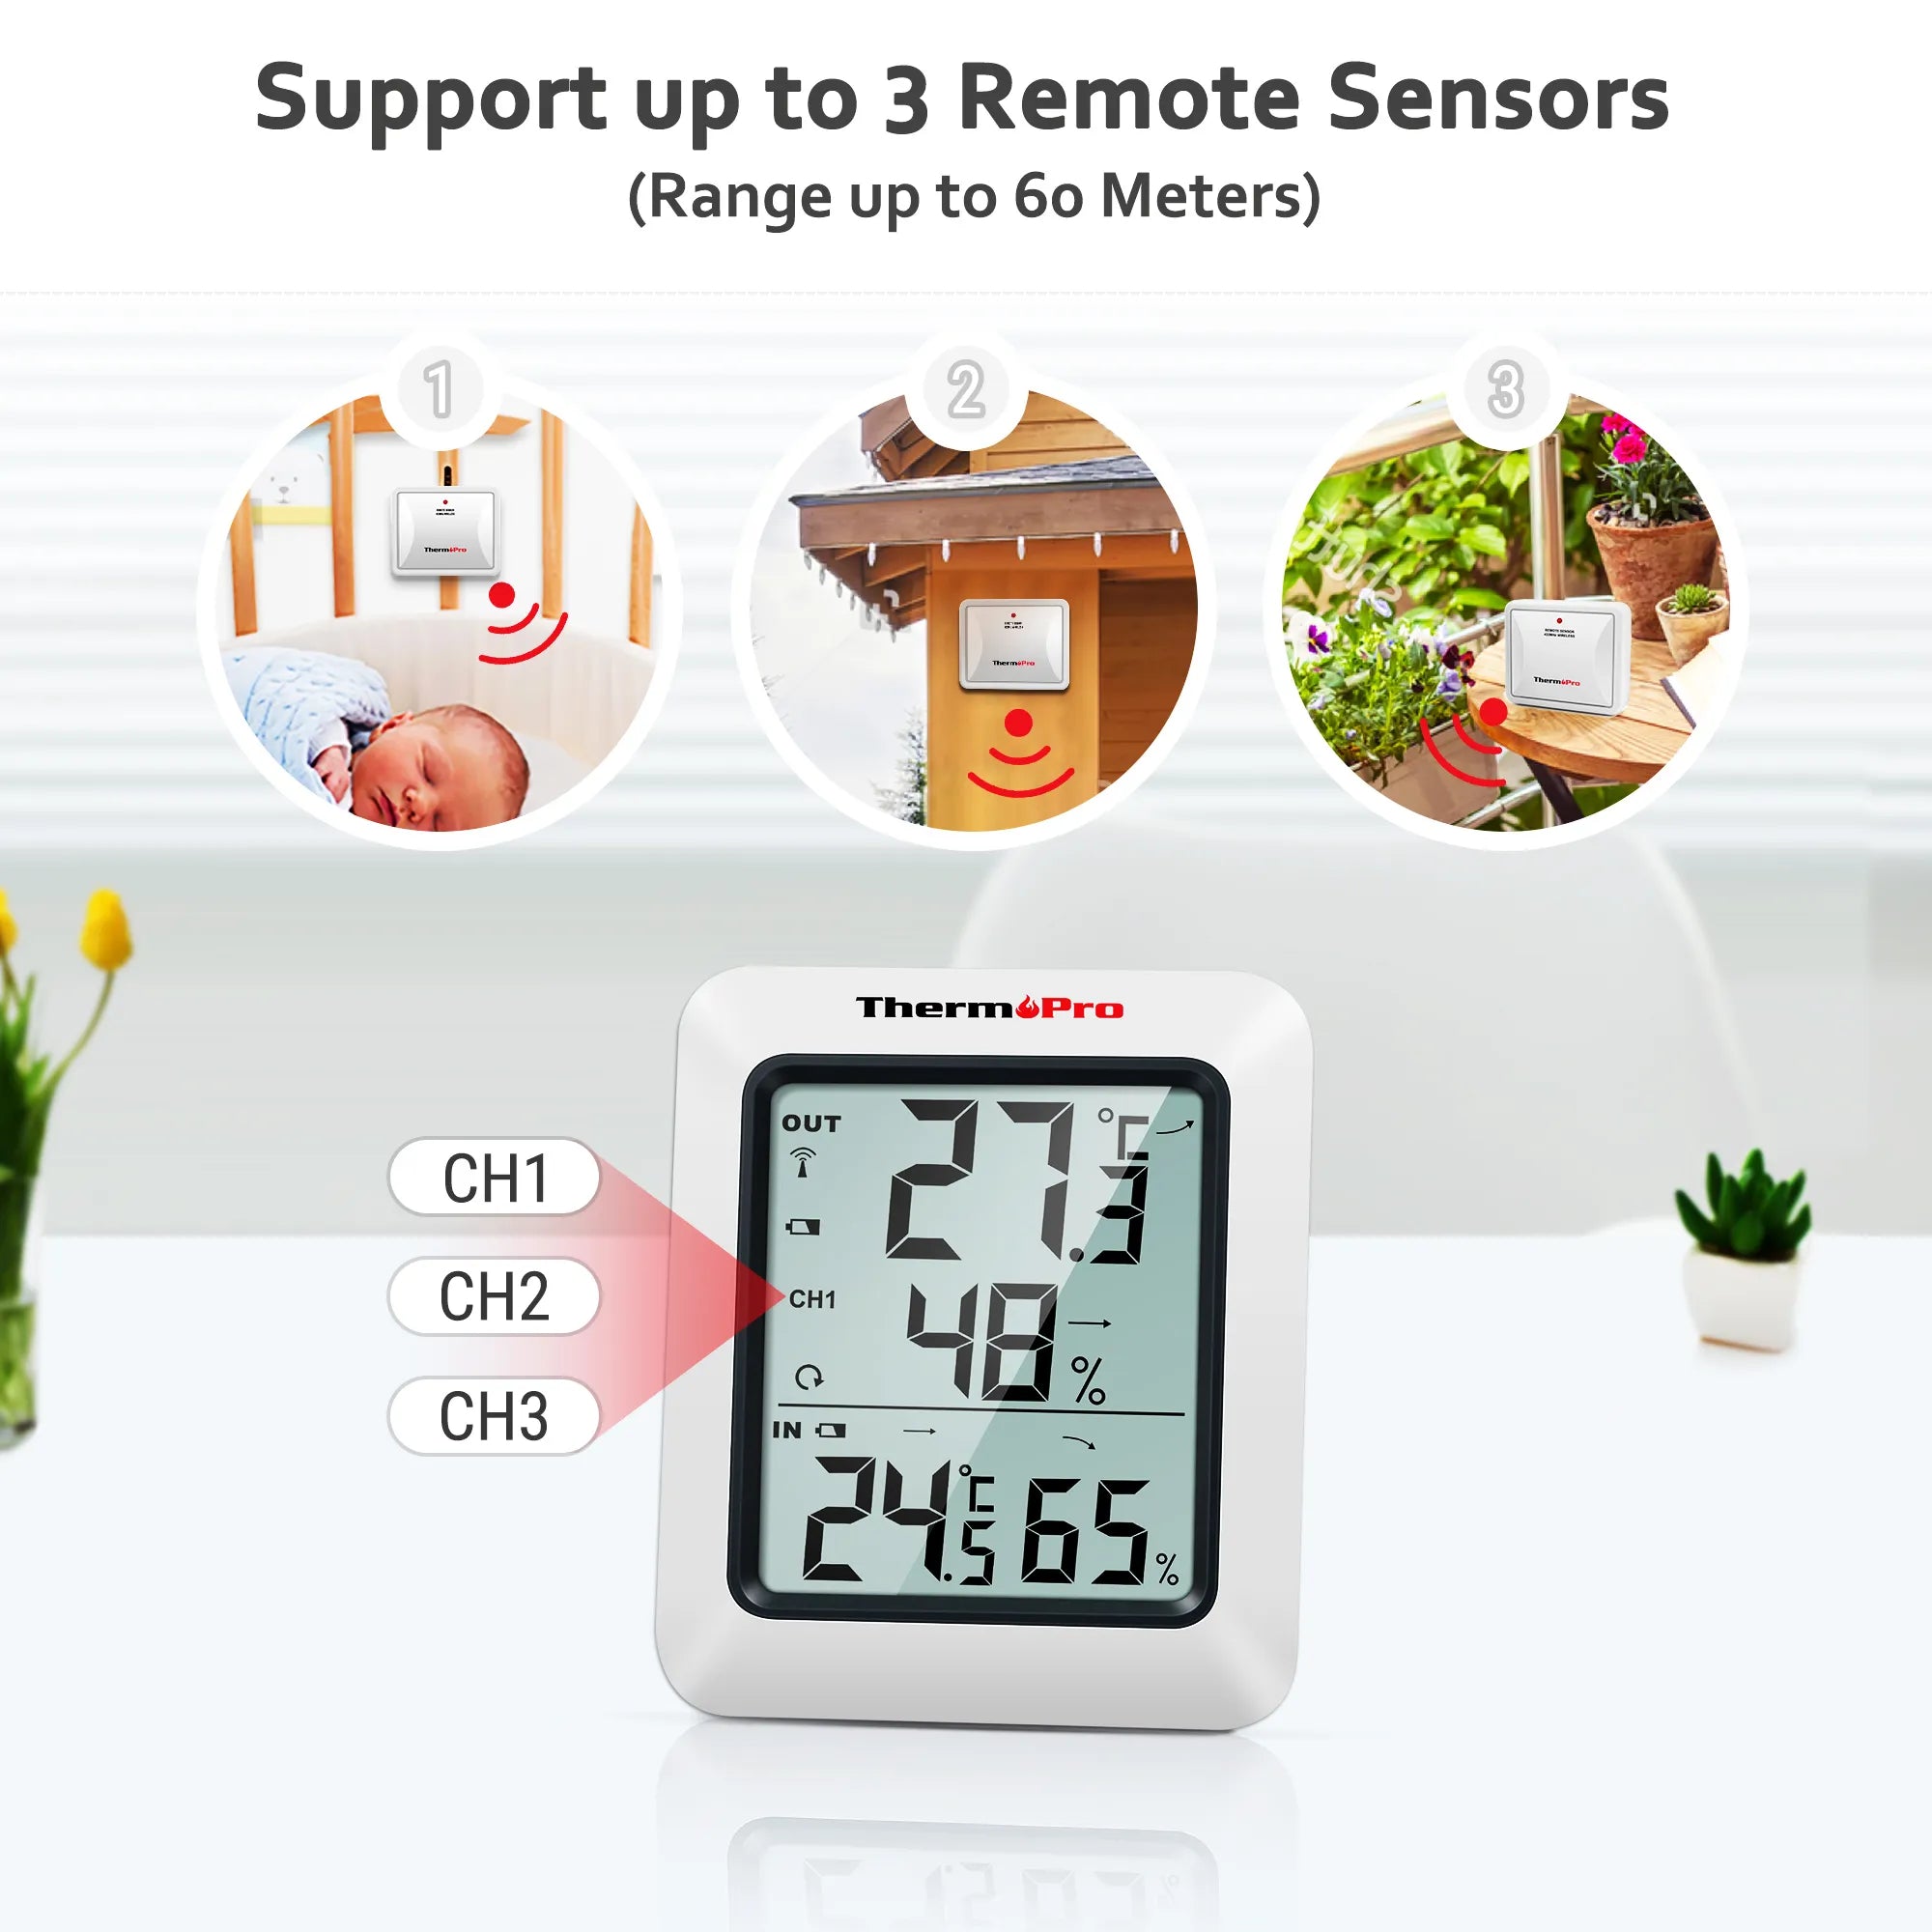 ThermoPro TP60C 60M Wireless Digital Indoor Outdoor Thermometer Hygrometer Weather Station for Home